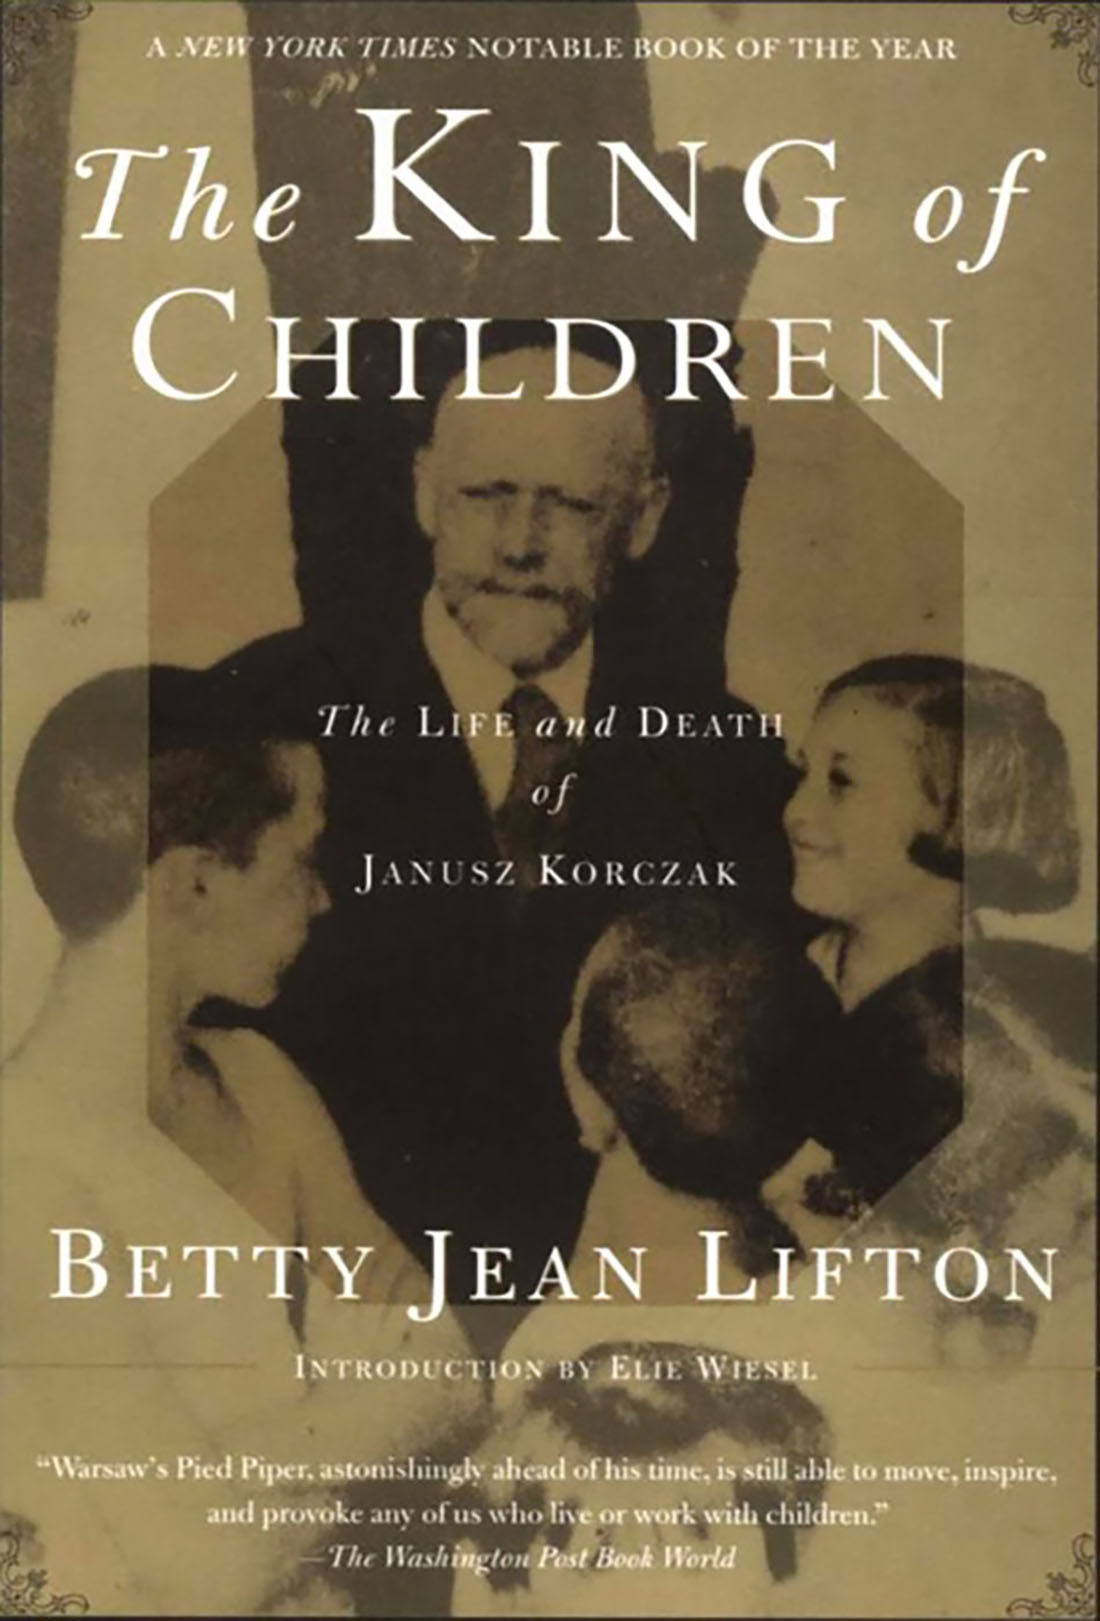 The Life and Death of Janusz Korczak The King of Children